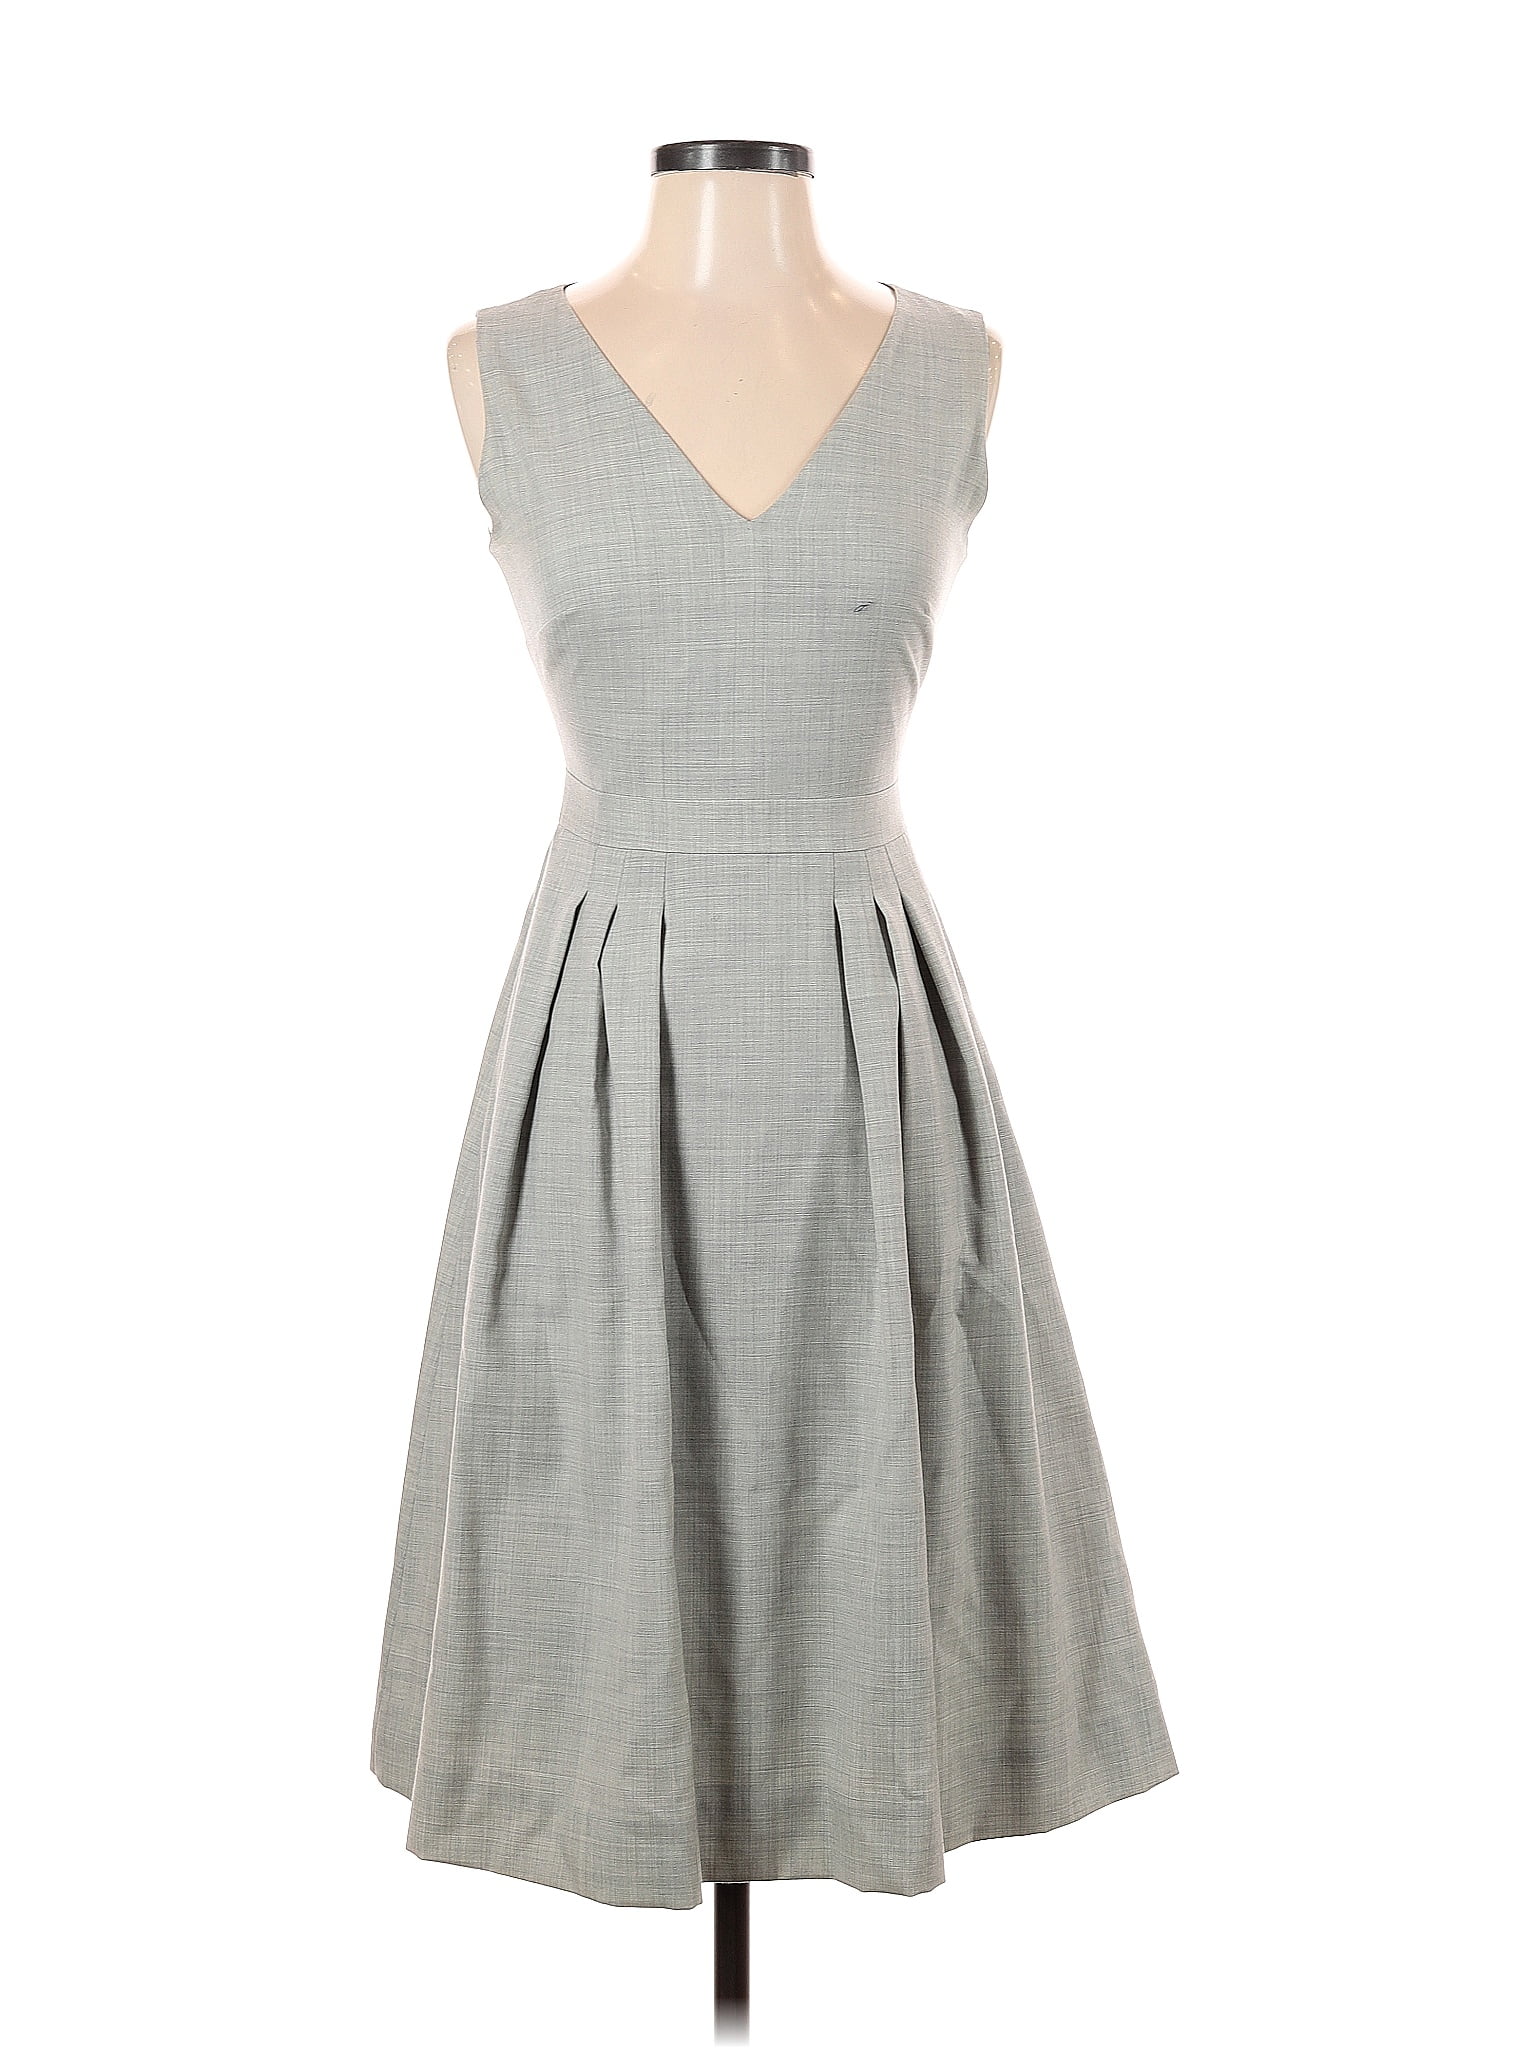 J.Crew 100% Wool Solid Gray Casual Dress Size 000 - 72% off | ThredUp